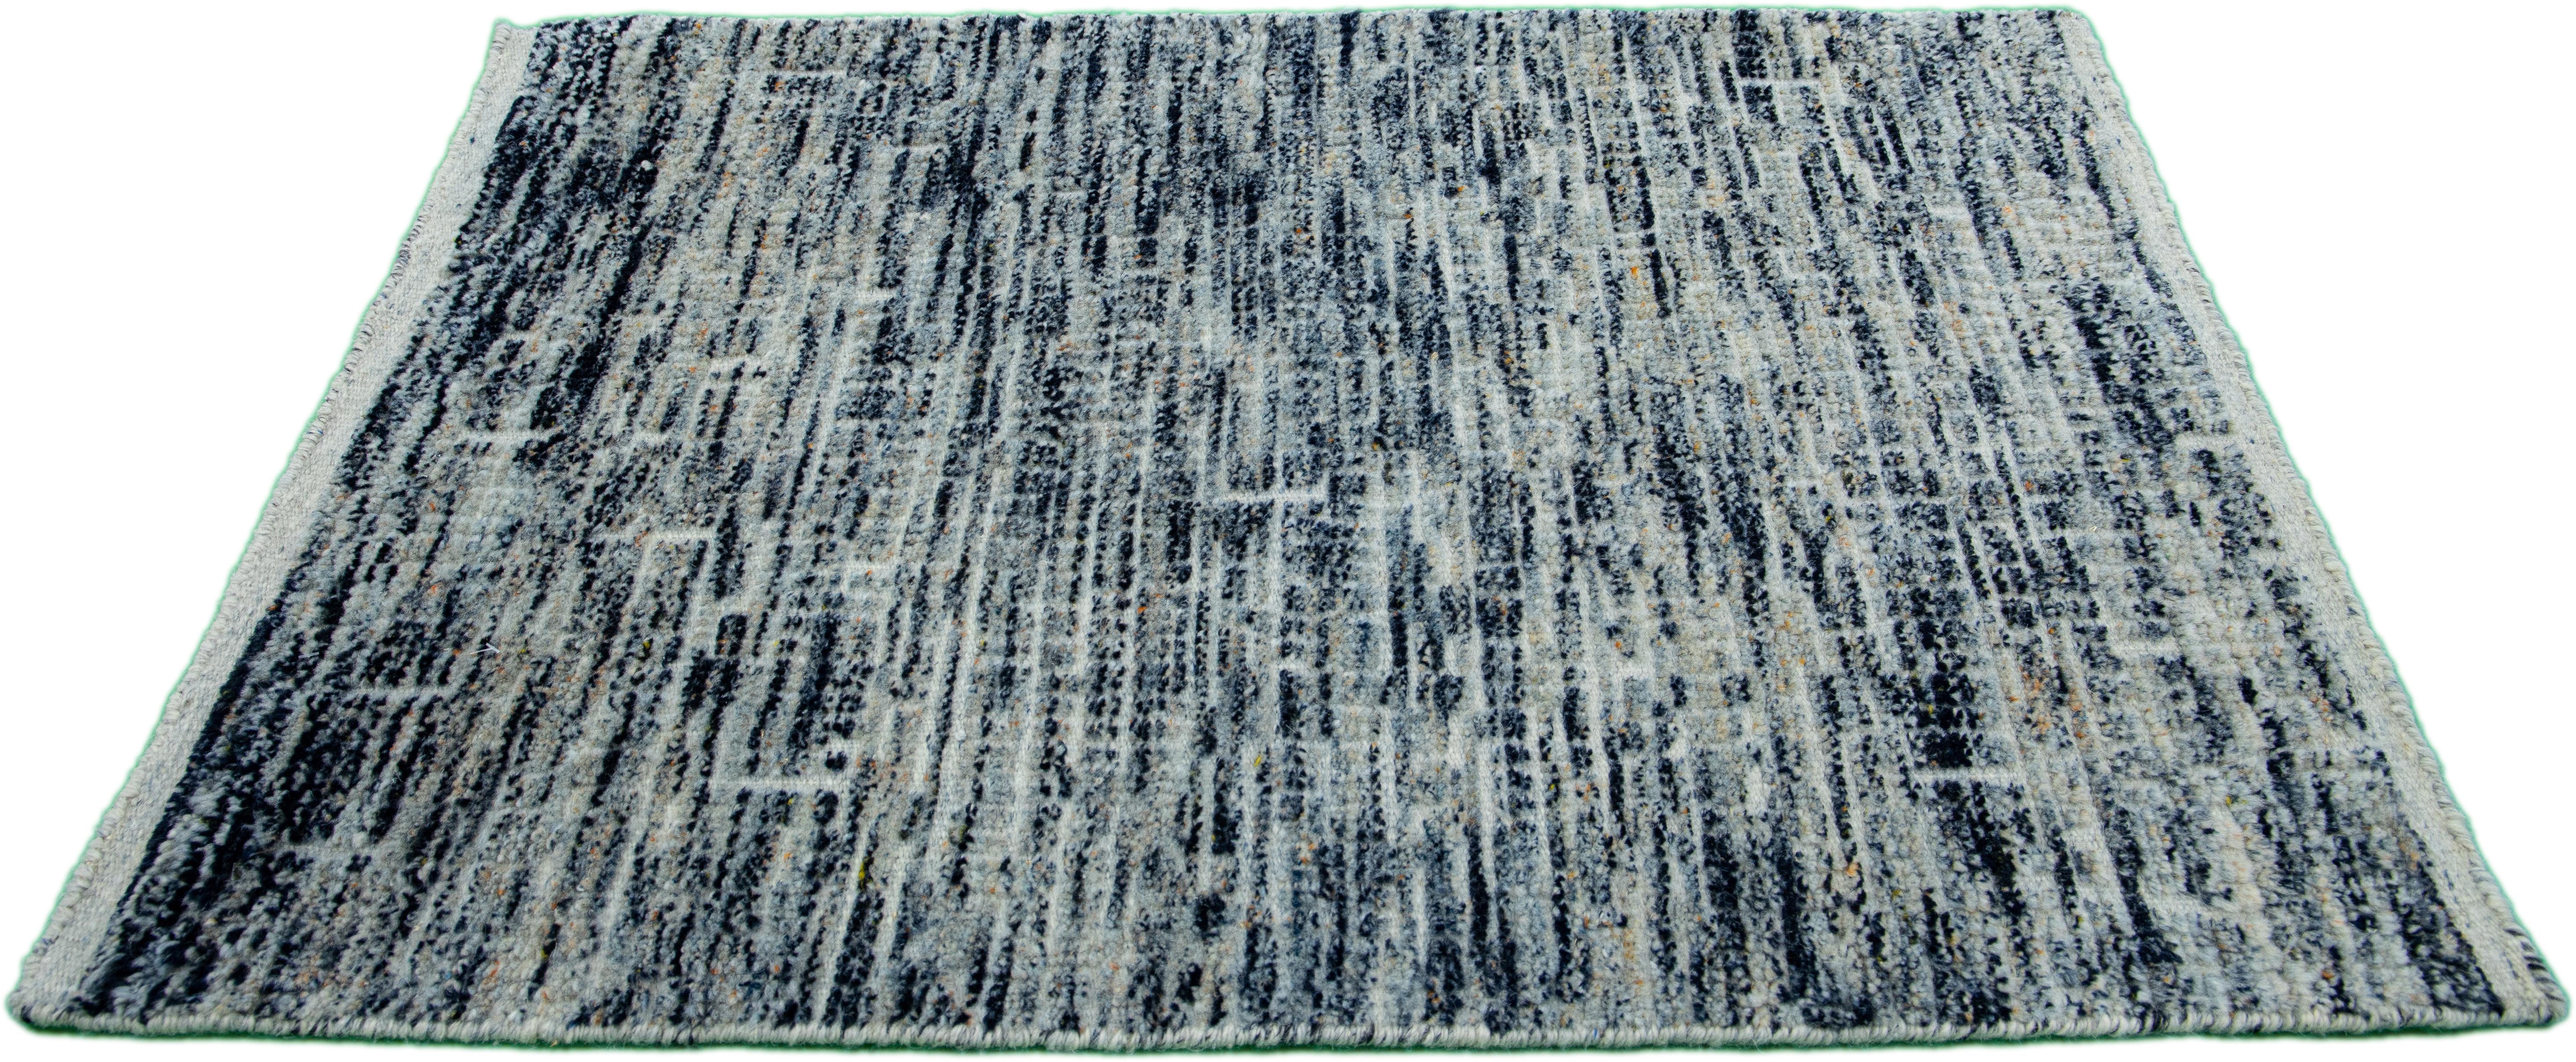 Apadana's Modern Moroccan Style wool custom rug. Custom sizes and colors made-to-order. 

Material: Wool 
Techniques: Hand-knotted
Style: Moroccan 
Lead time: Approx. 15-16 wks available 
Colors: As shown, other custom colors are available.